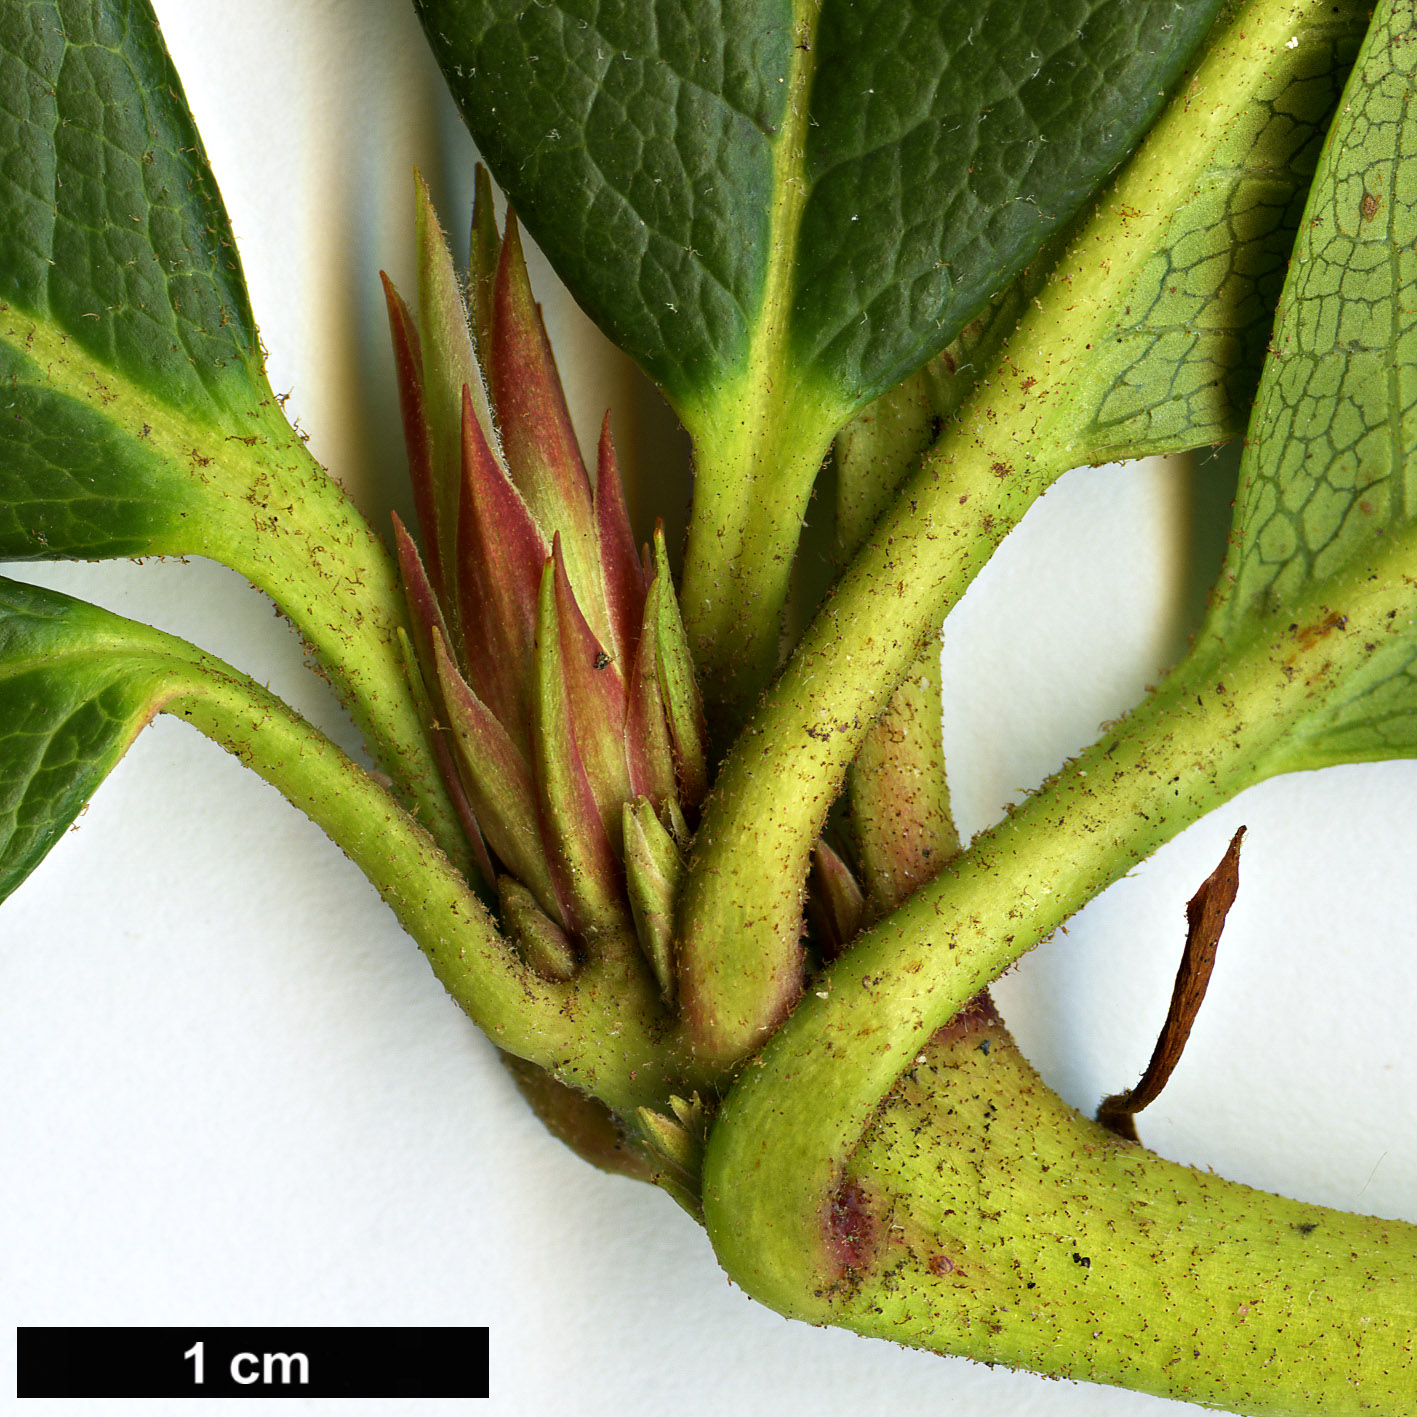 High resolution image: Family: Ericaceae - Genus: Rhododendron - Taxon: forrestii - SpeciesSub: Repens Group